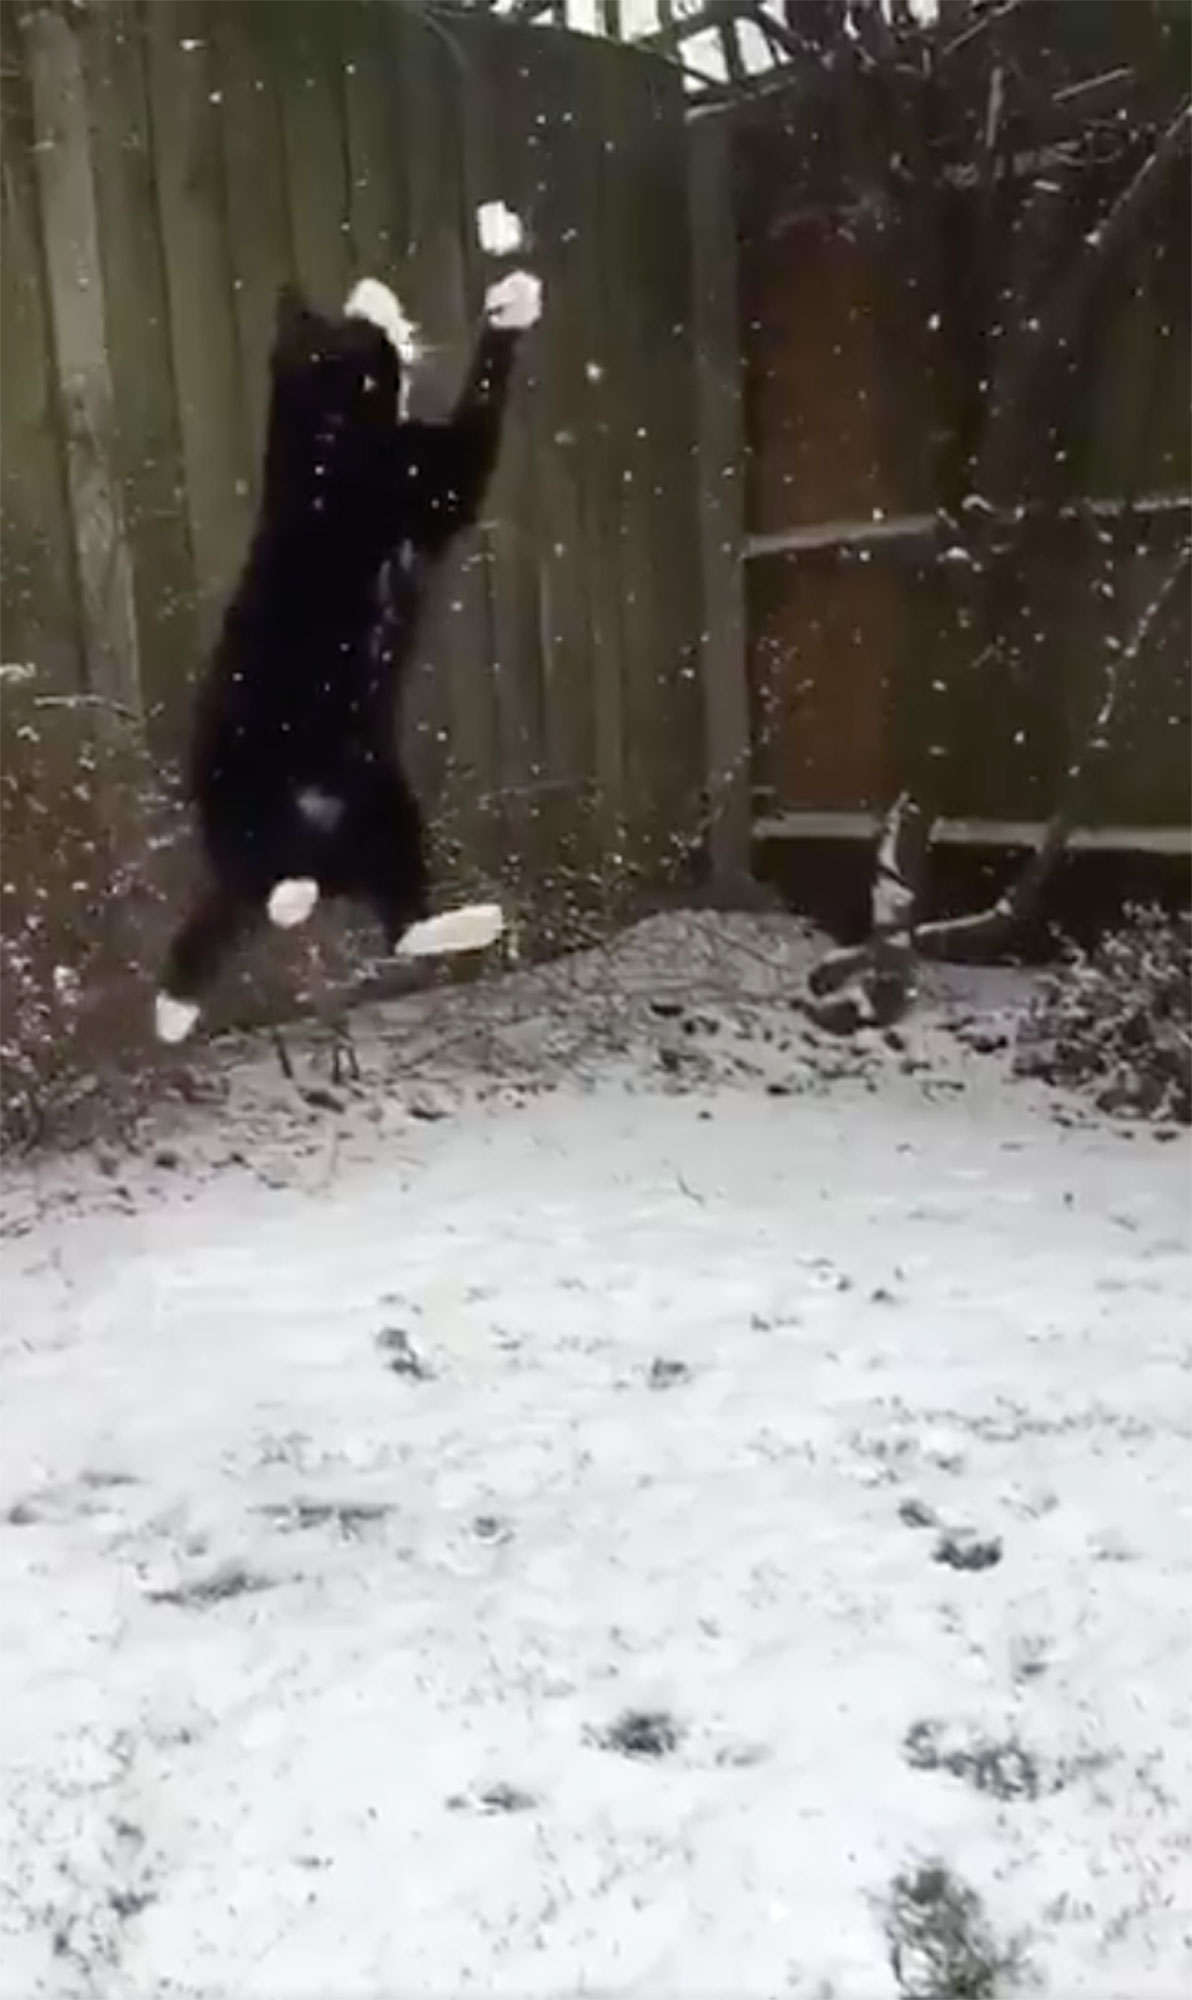 Cat Catches Snowball Twitter Video | PEOPLE.com